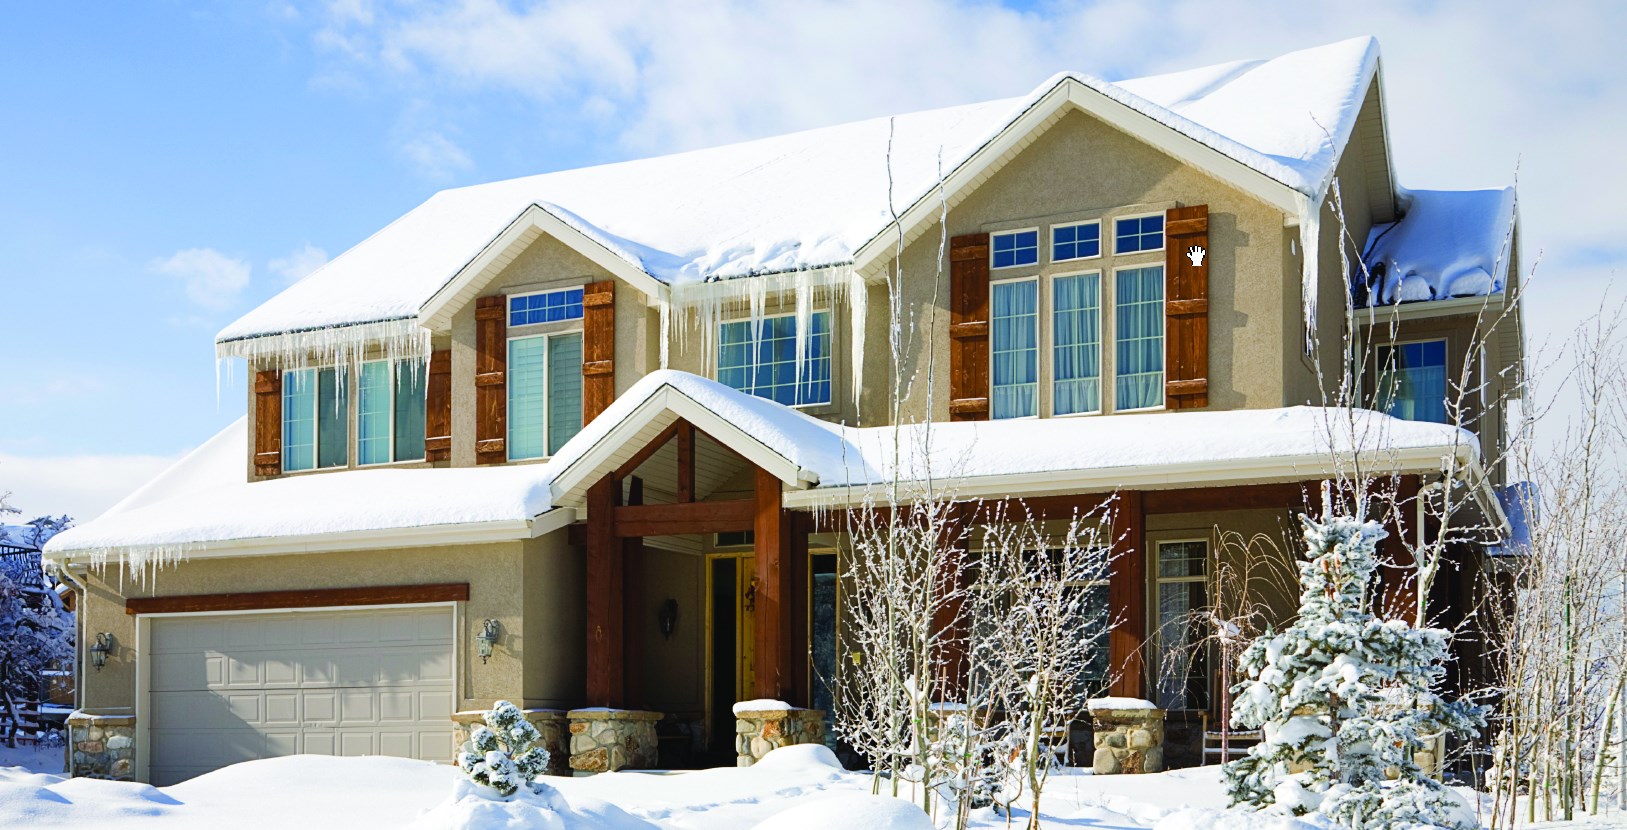 Looking after your home in cold weather